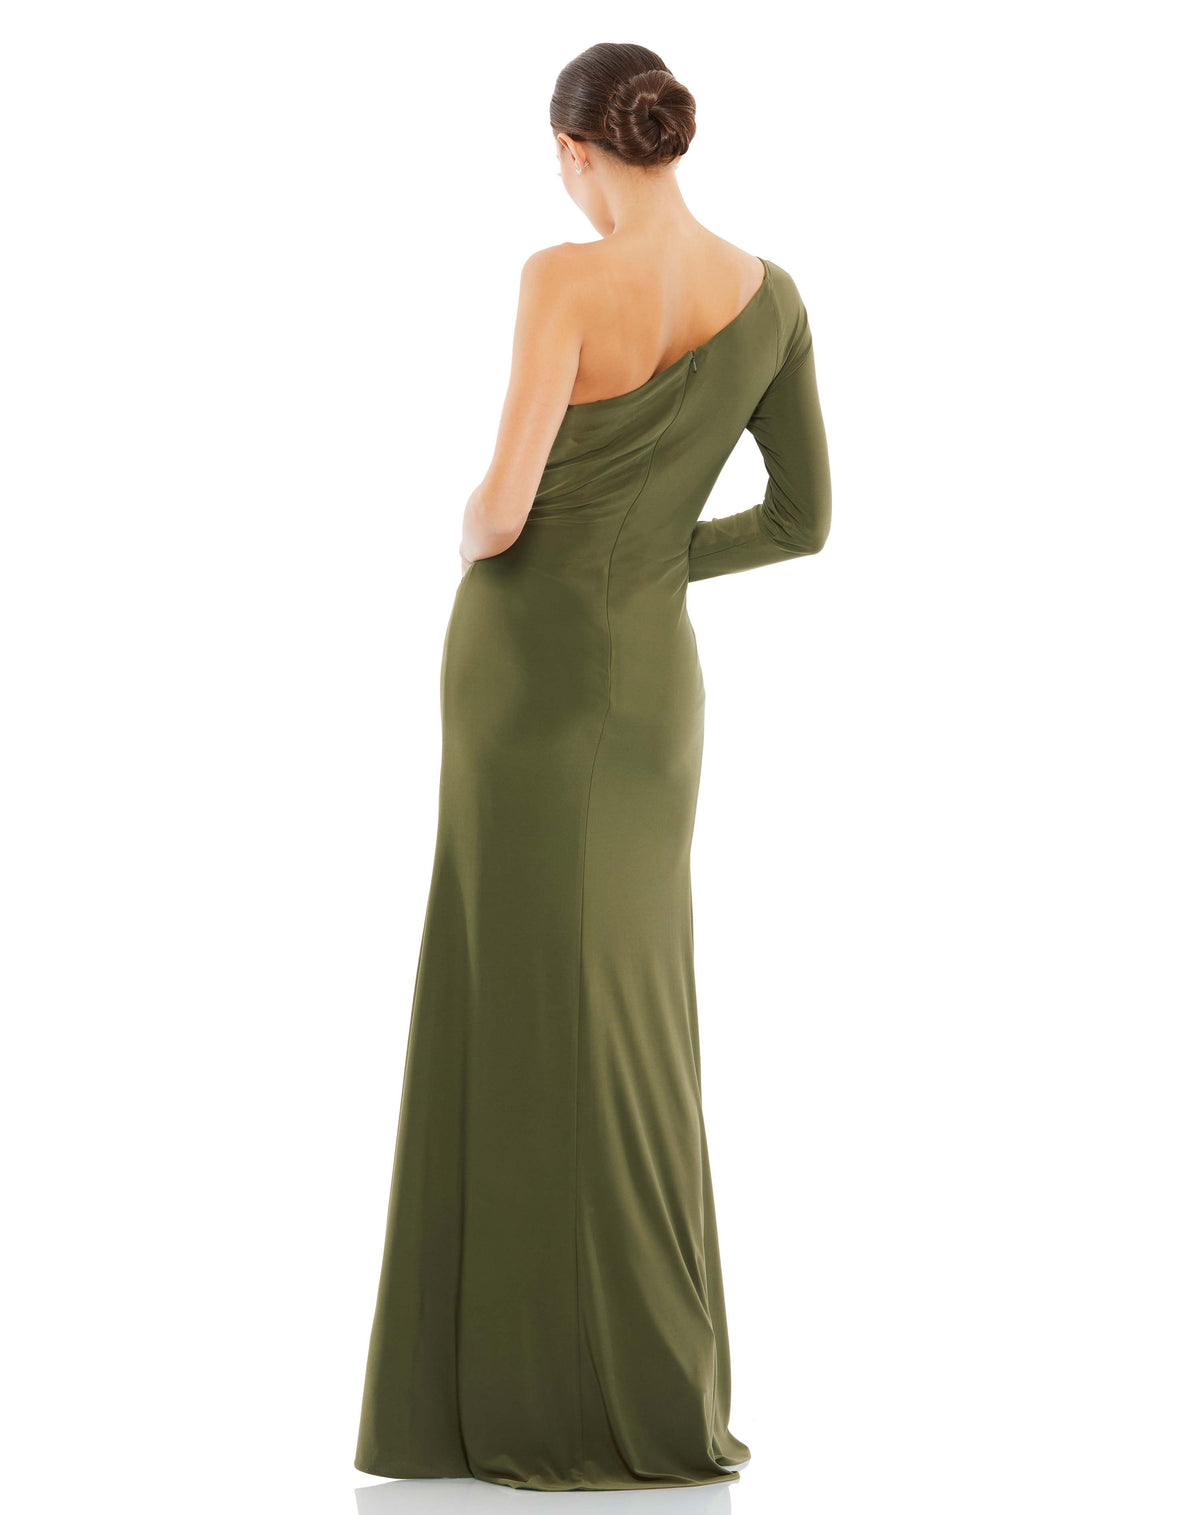 This stunning Mac Duggal elegant, olive, asymmetric evening dress, crafted from smooth jersey fabric, the floor-grazing dress is textured with pleats, an off-center waist twist, and starburst beads and glittering rhinestones at the edge of the single sleeve. A high slit underscores the gown’s sexy and modern styling. It’s perfect for a special-occasions proms and weddings! back